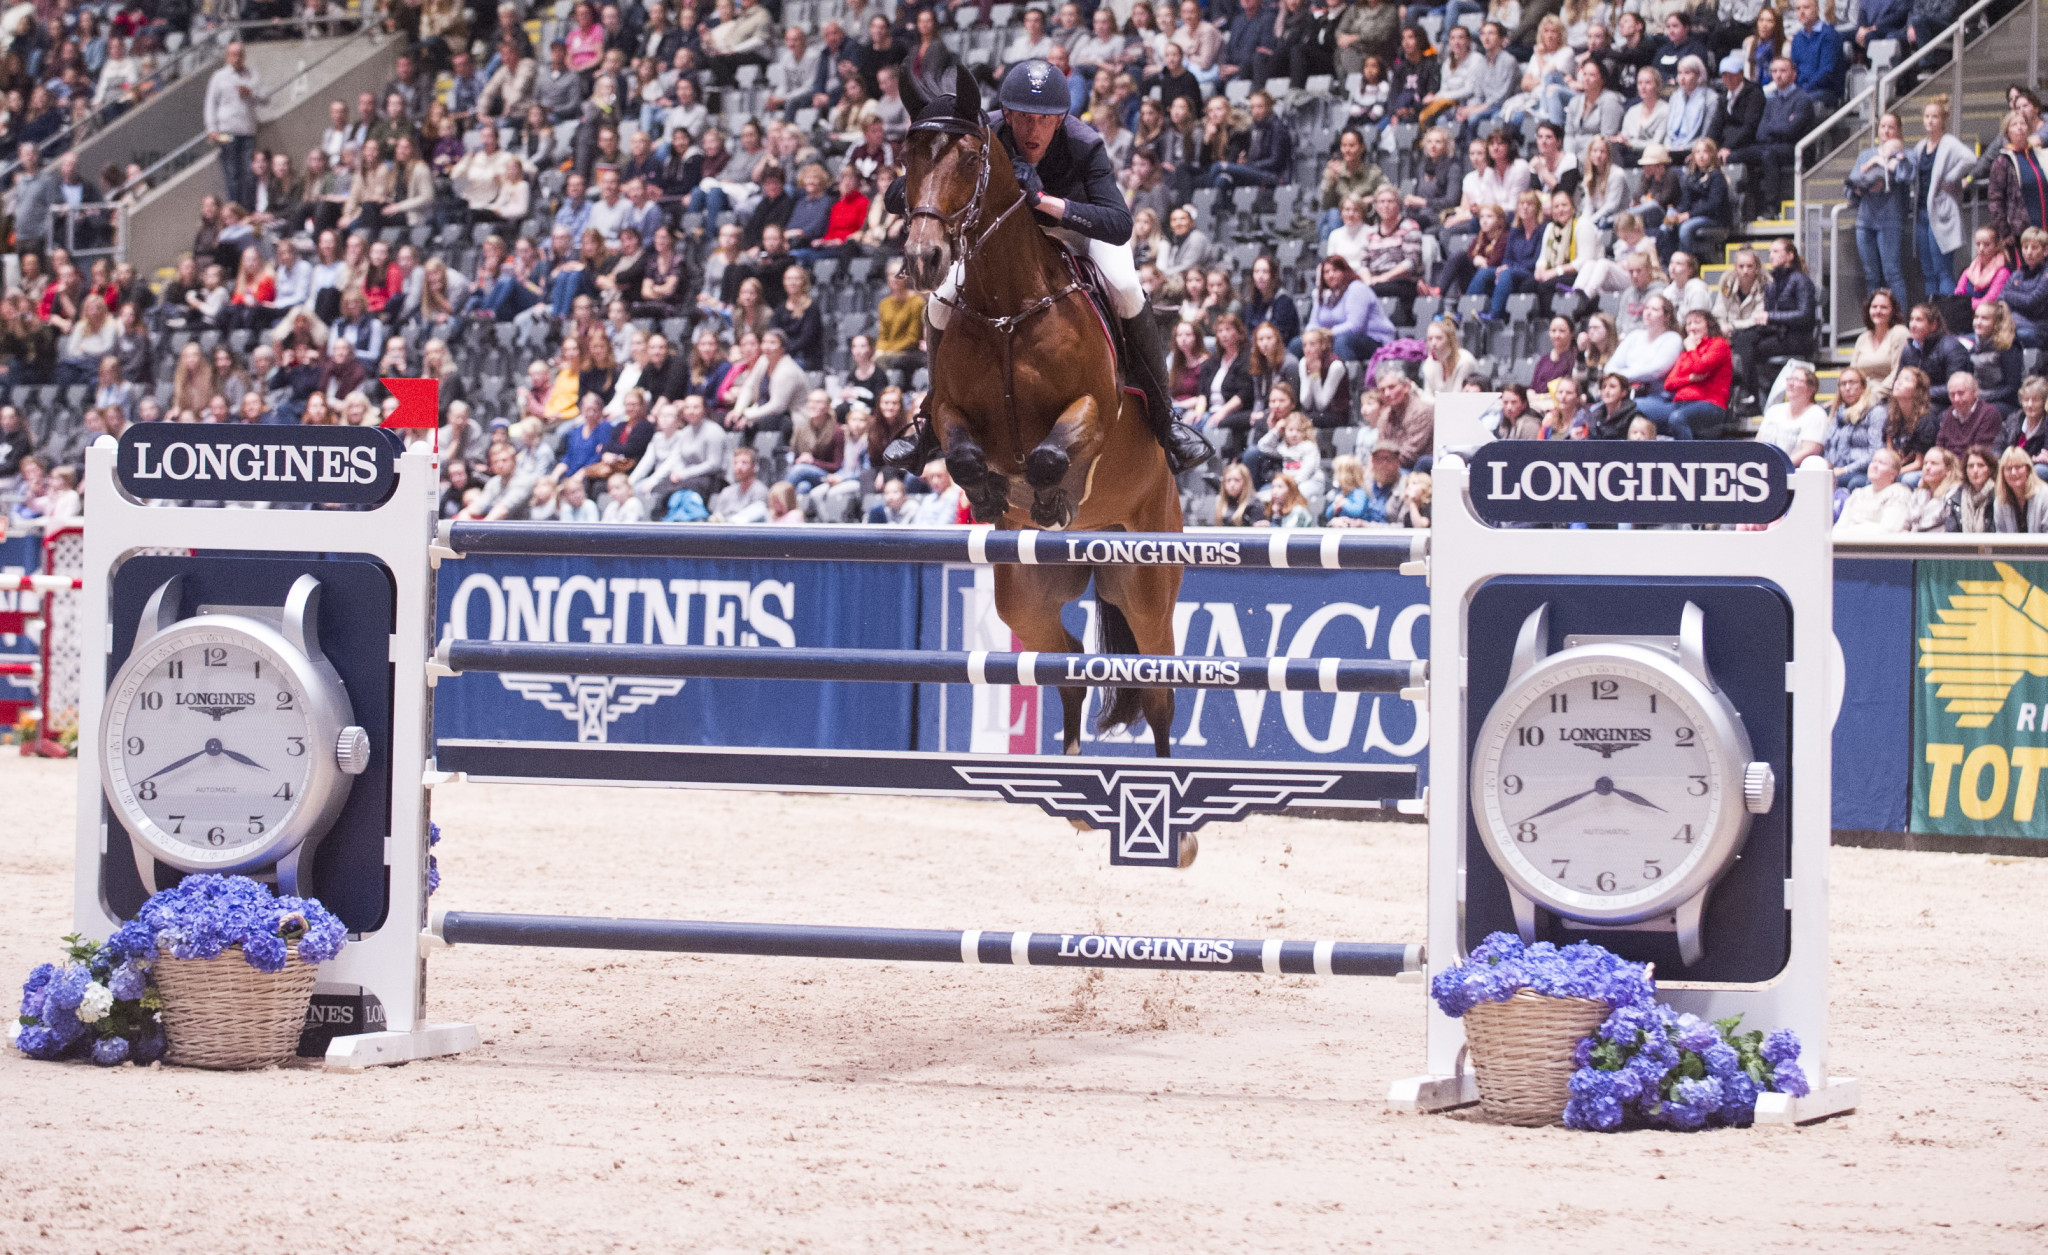 Kevin Staut will be seeking a home win in Bordeaux ©FEI